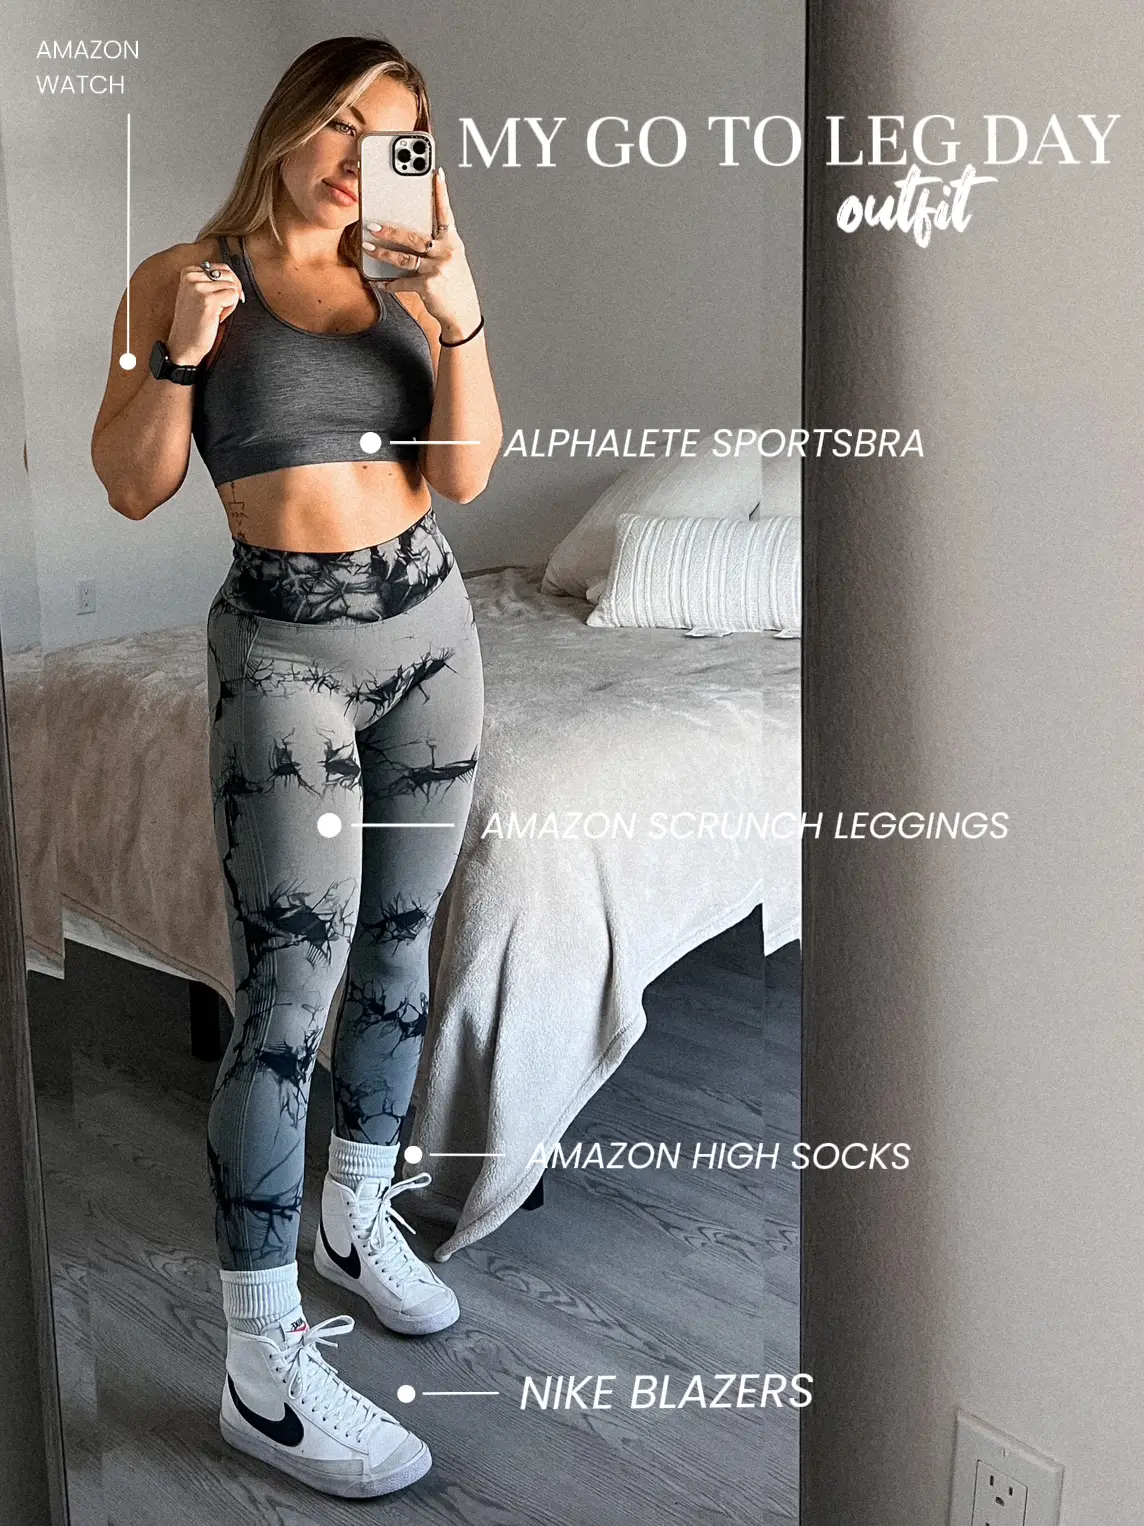 What are Scrunch Bum Leggings Supplier？ - Fitop